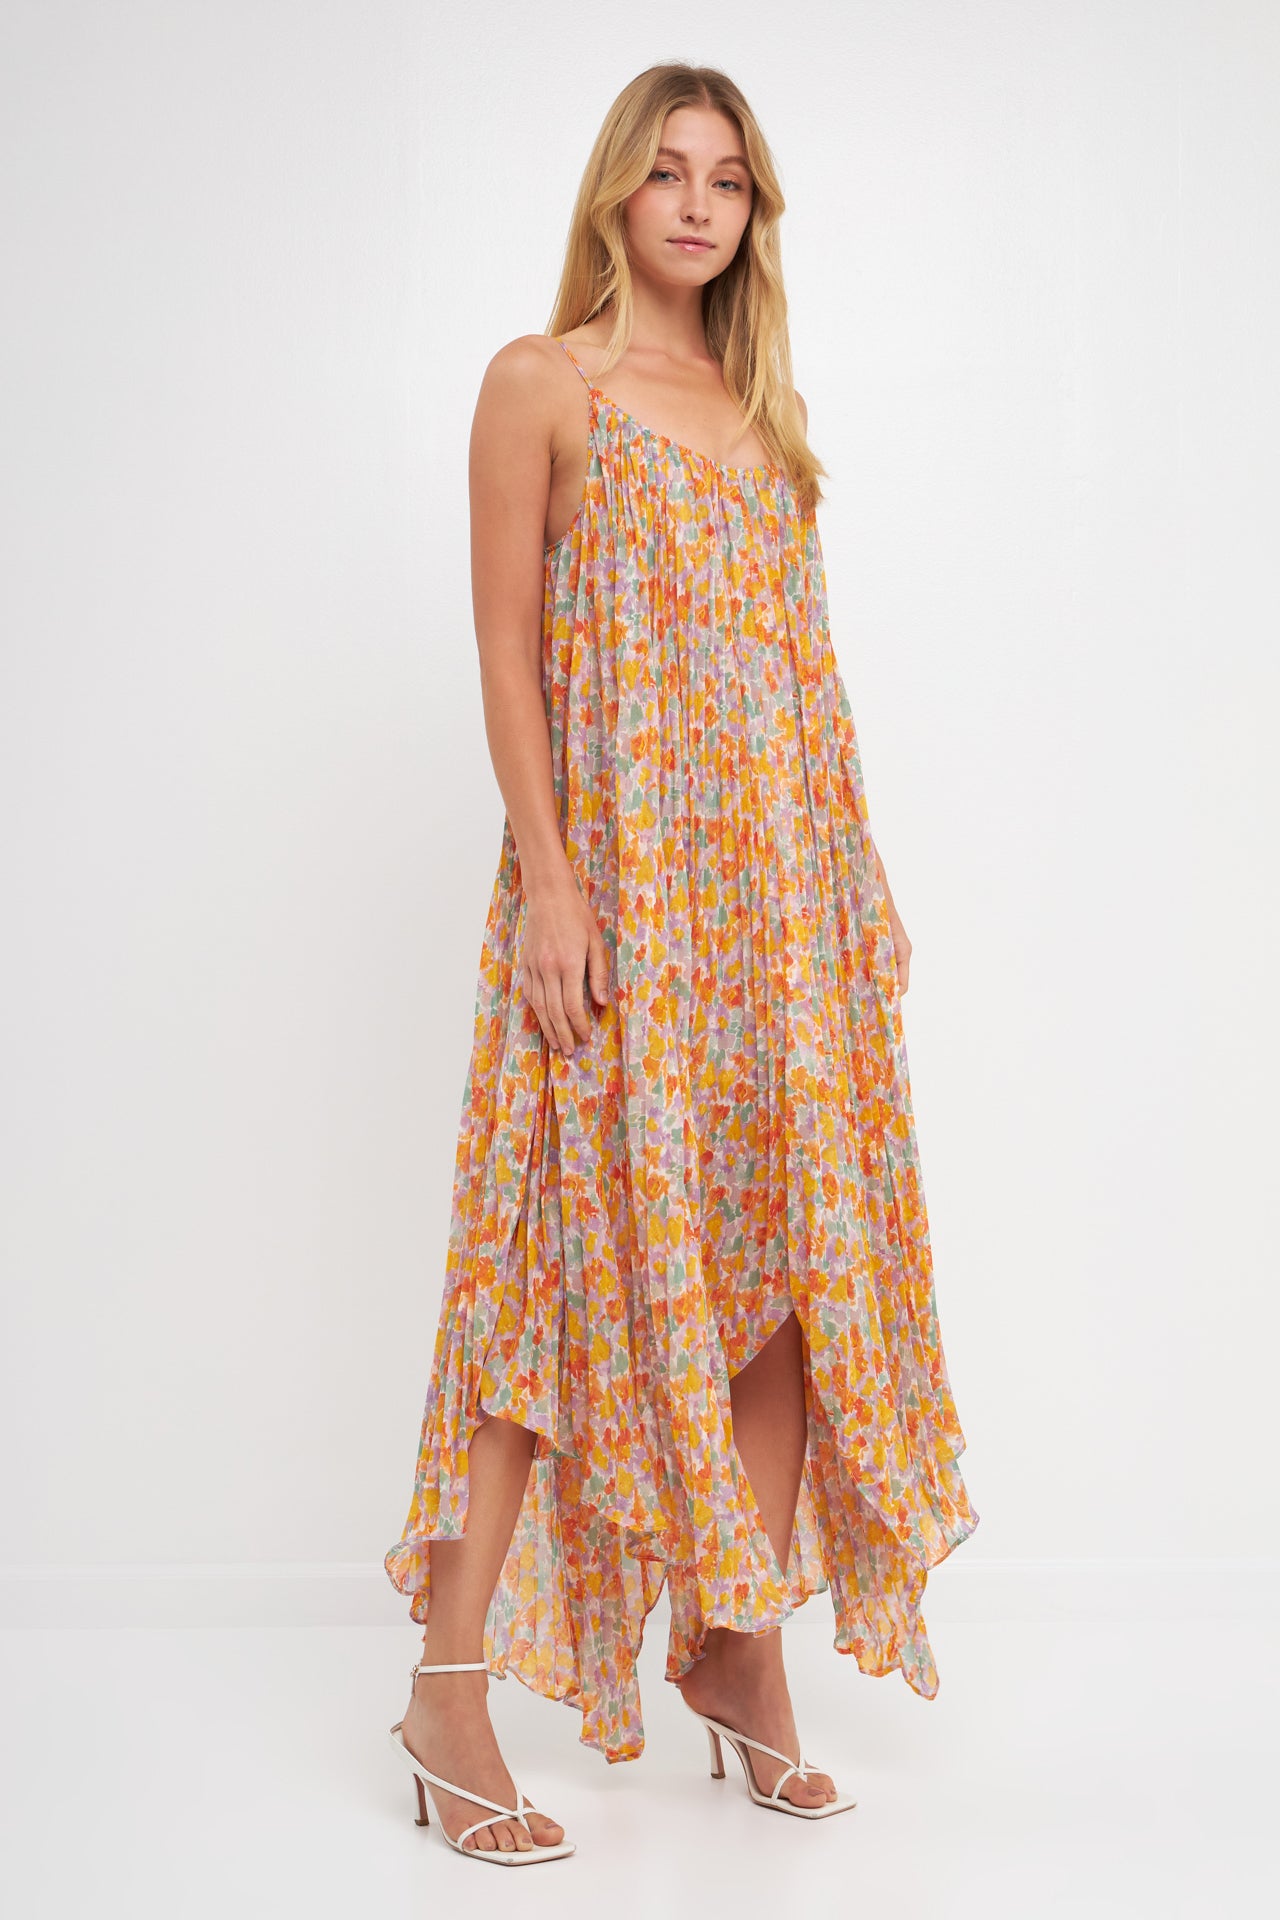 ENDLESS ROSE - Pleated Waterfall Maxi Dress - DRESSES available at Objectrare